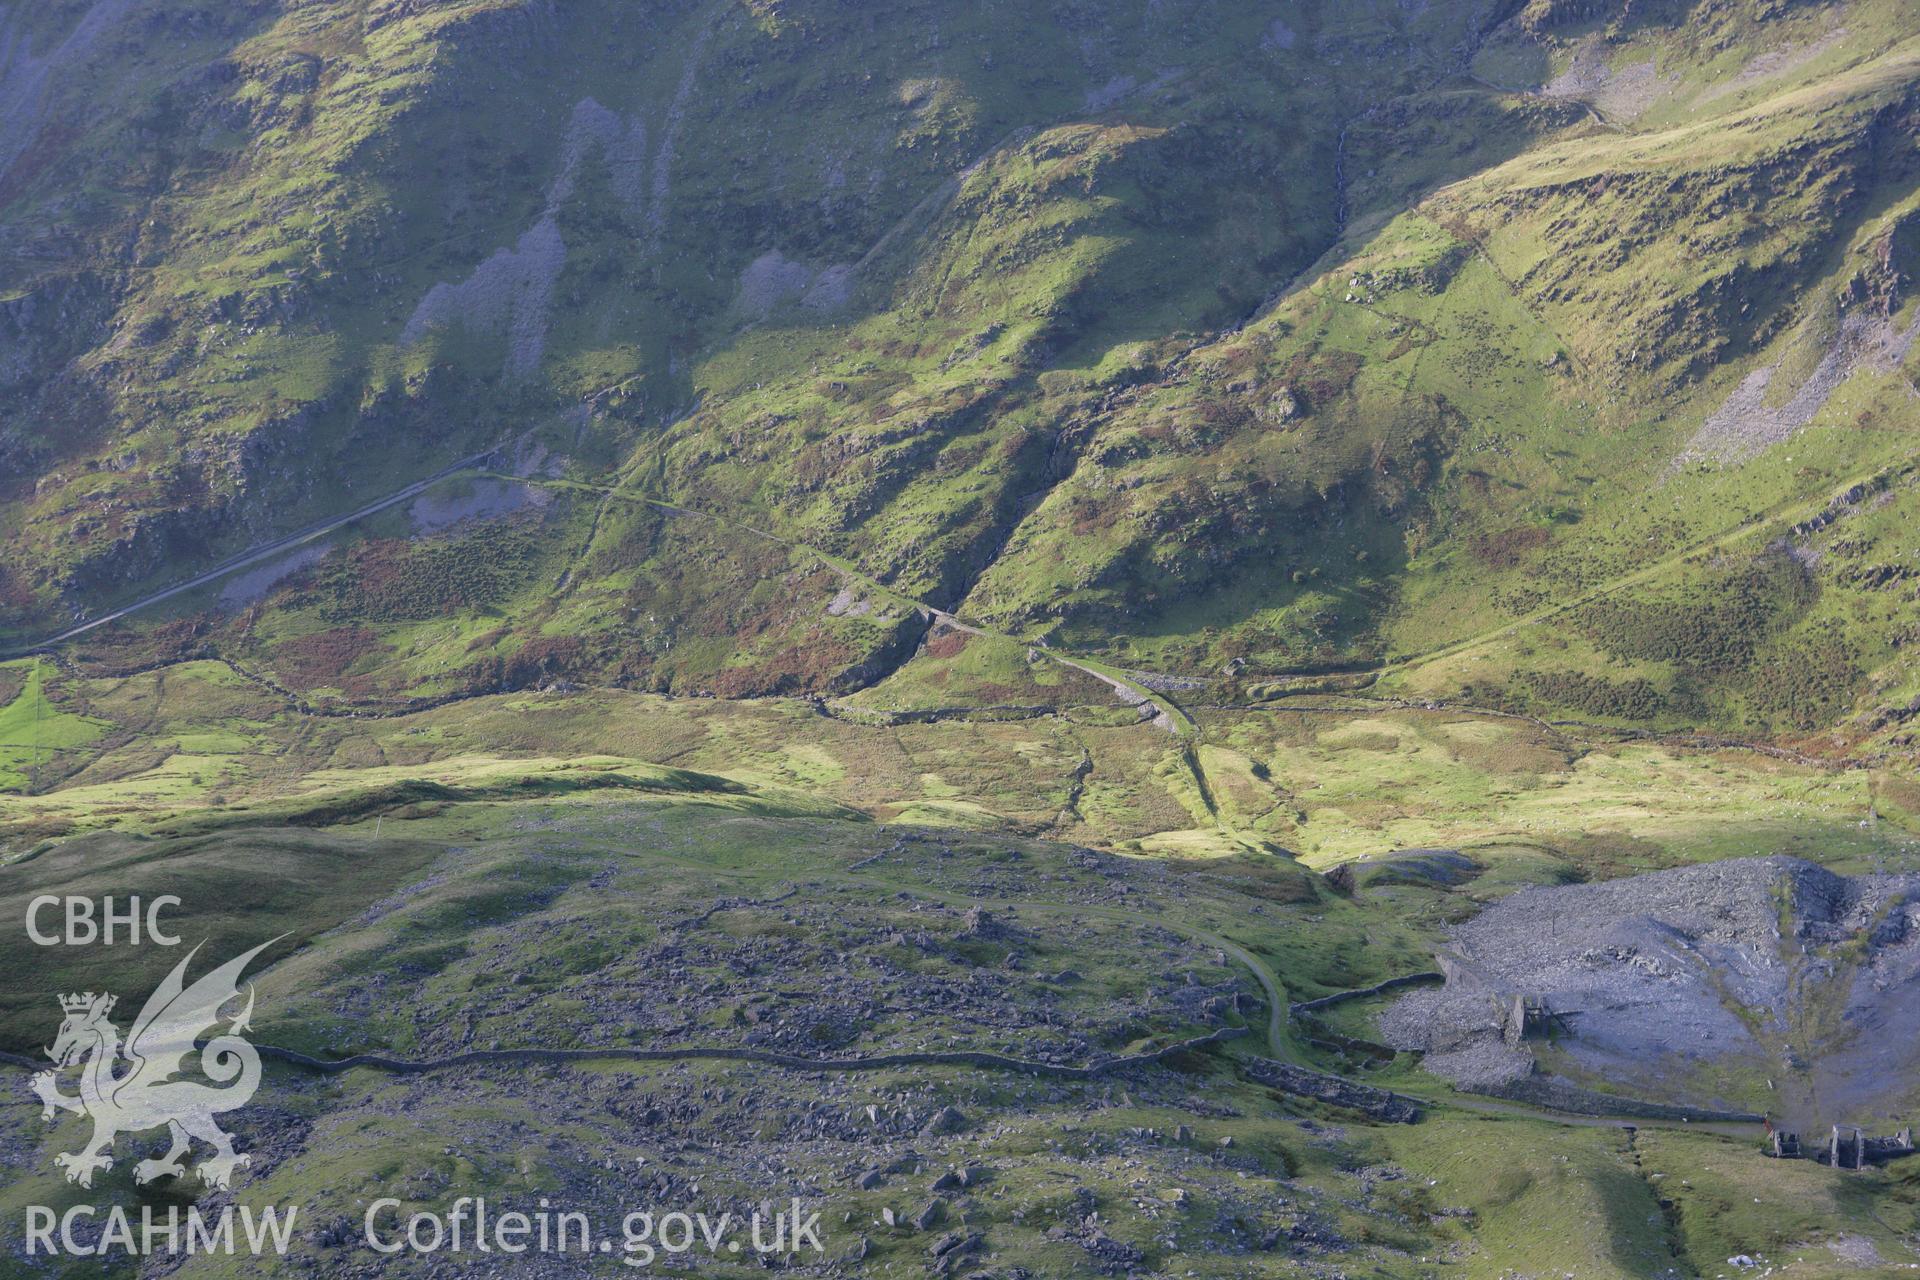 RCAHMW colour oblique aerial photograph of Croesor Slate Quarry. Taken on 06 September 2007 by Toby Driver